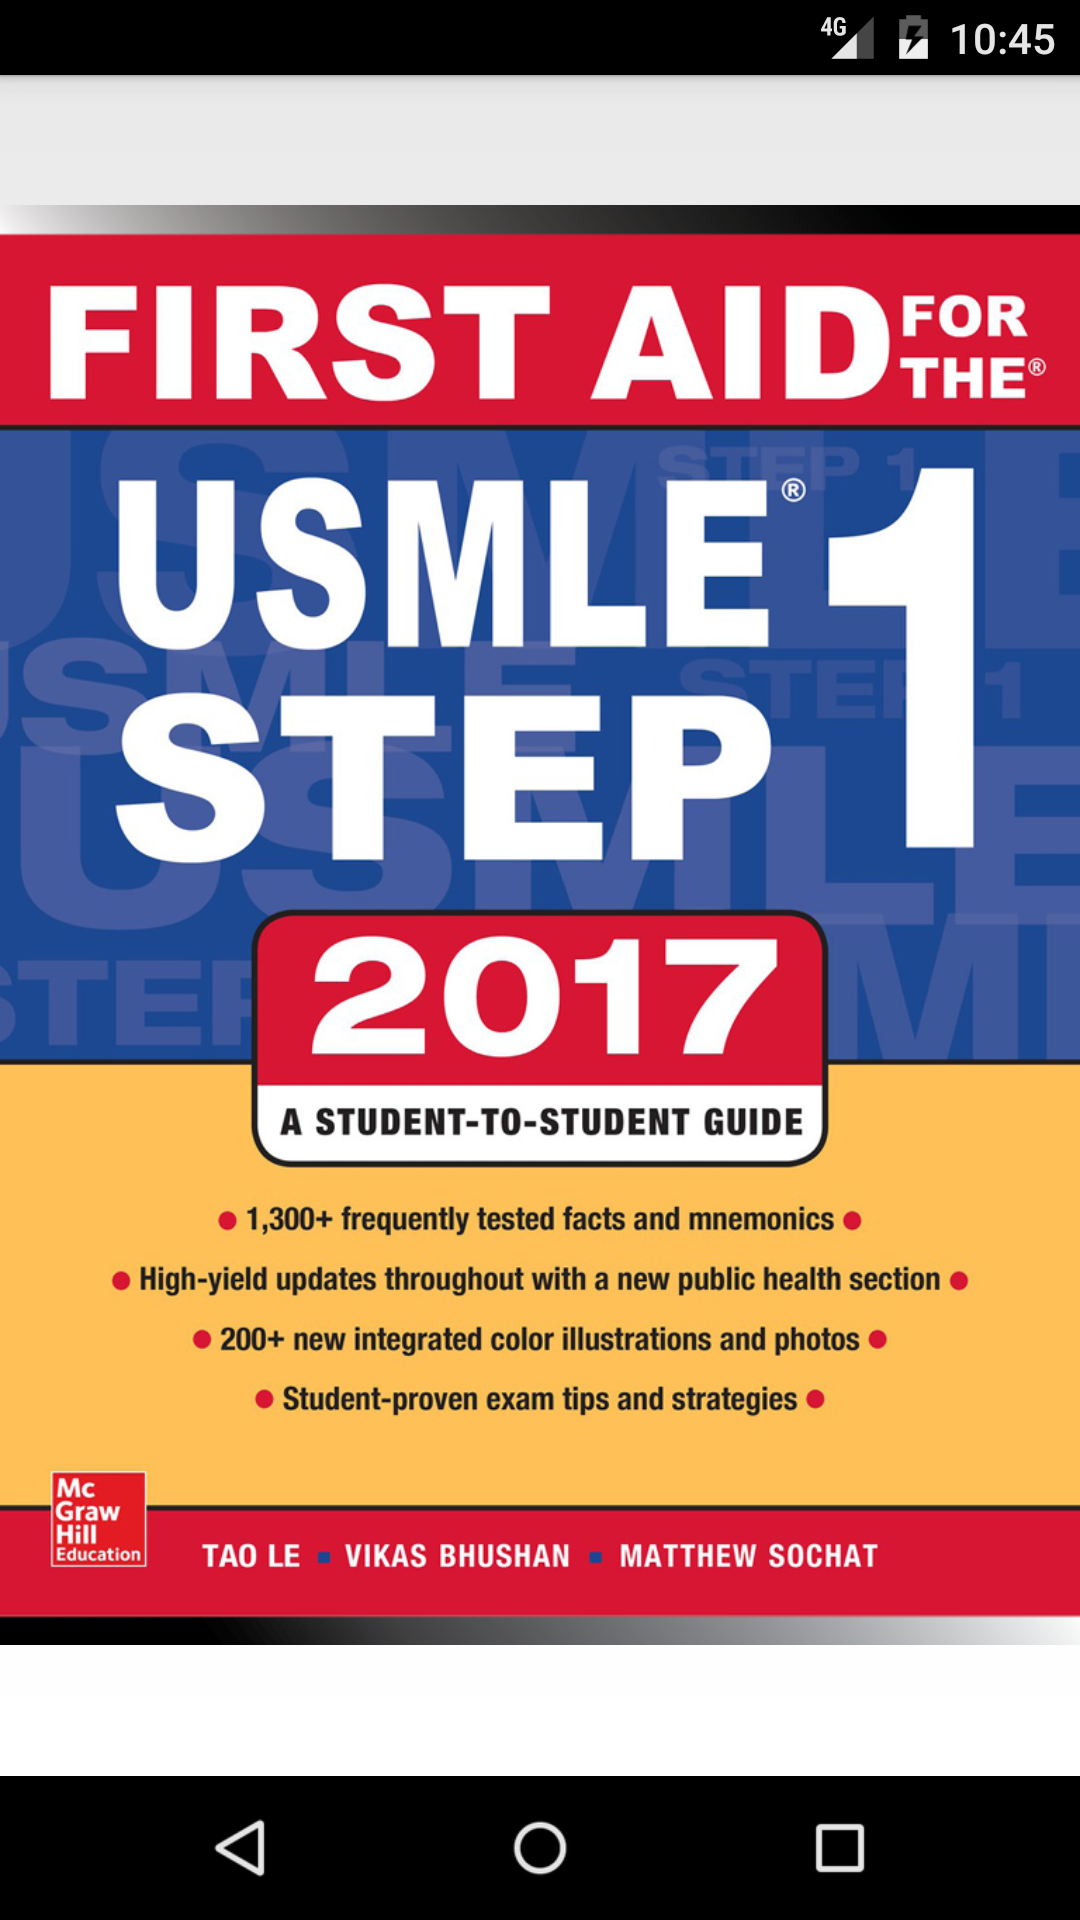 Android application First Aid USMLE Step 1, 2017 screenshort